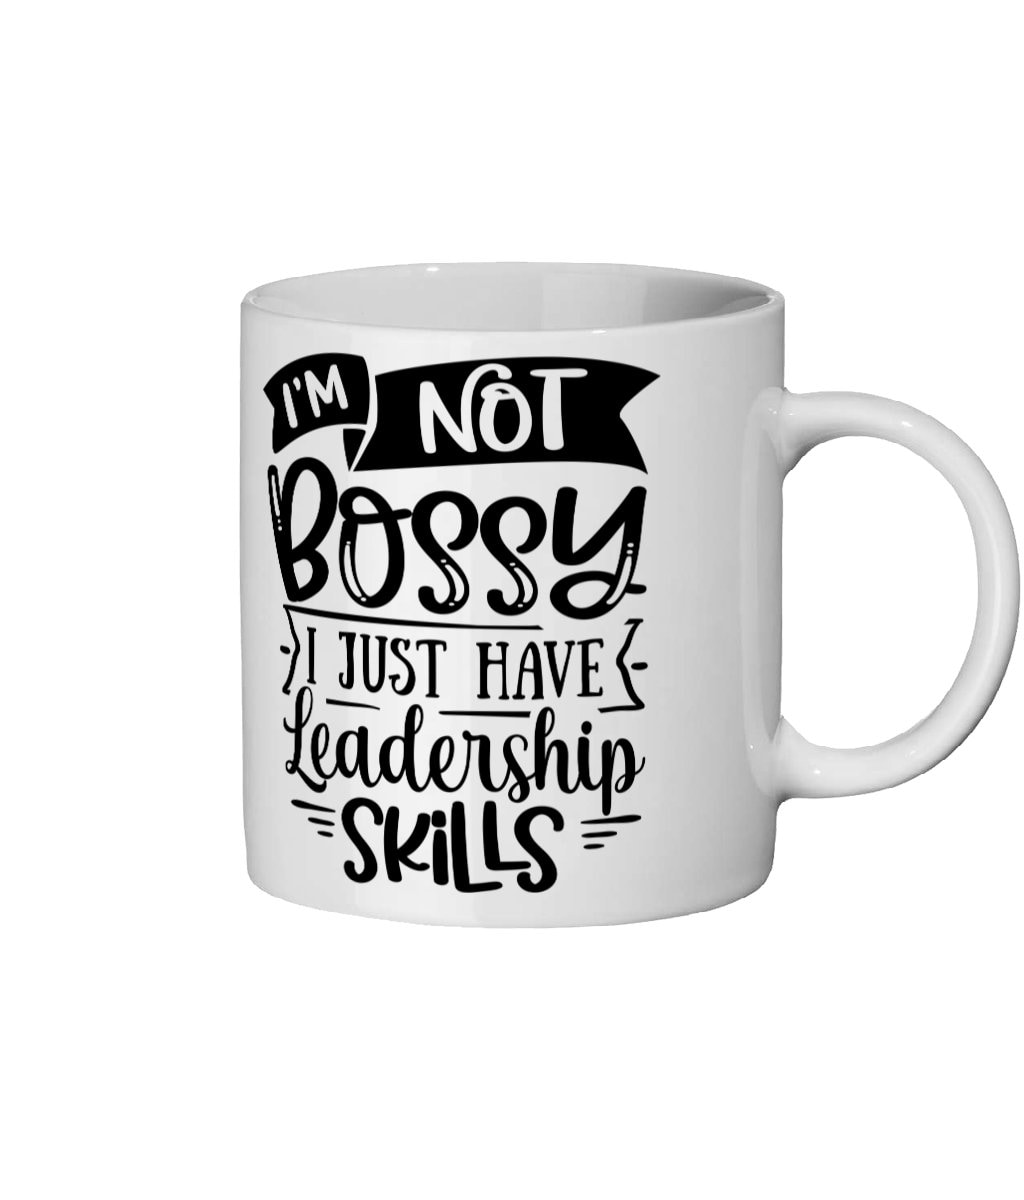 I'm not bossy? Are you? 
Ideal gift to make a friend/colleague/family member smile. cluckysbazaar.etsy.com/listing/142161… 

#FunnyMugs
#SarcasticMugs
#HumorousCups
#CoffeeHumor
#MugLife
#WittyMugs
#SassySips
#LaughWithCoffee
#MugAddict
#SipAndSmile
#MugObsession
#CaffeineComedy
#SarcasticSips